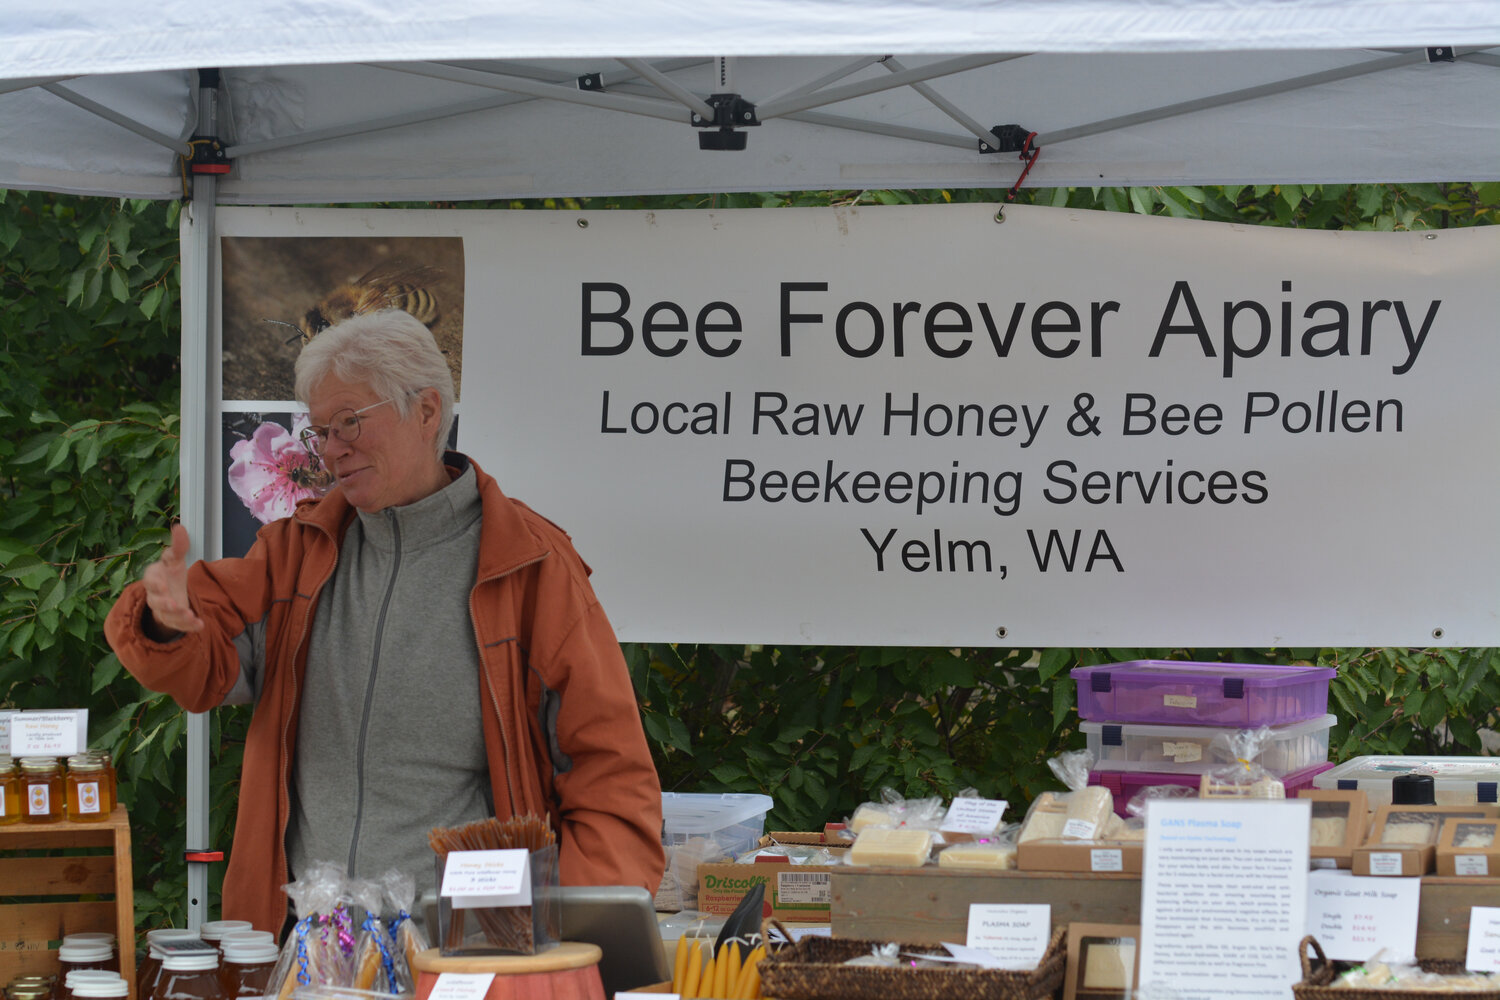 Karla Borschinski discusses Bee Forever Apiary’s product with a customer on Sept. 30 at the final Yelm Farmers Market of the year.